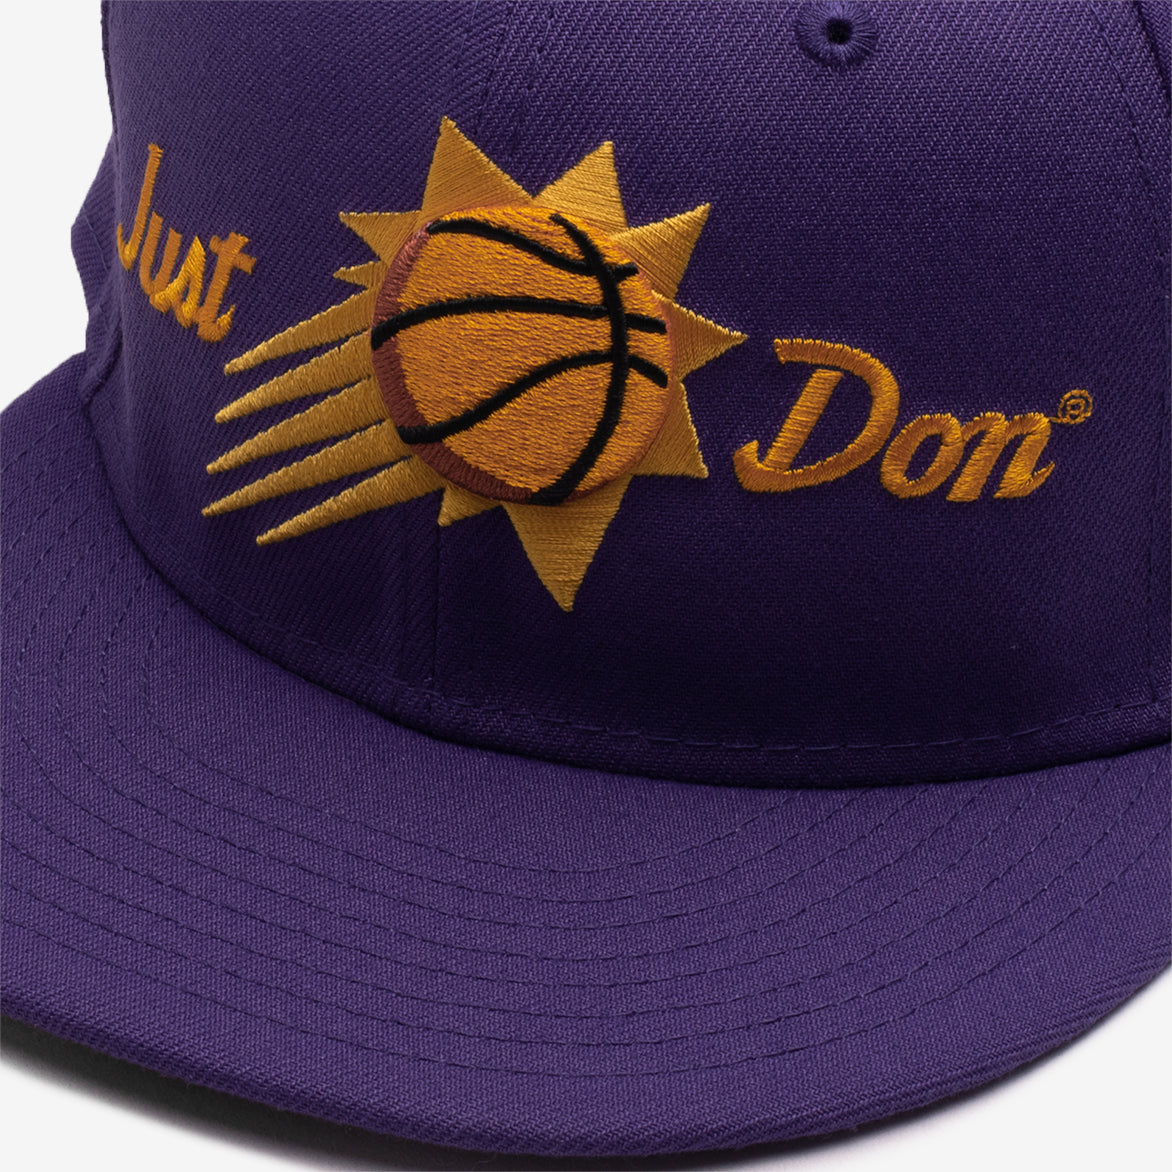 JUST DON X NEW ERA NBA 59FIFTY FITTED "SUNS"